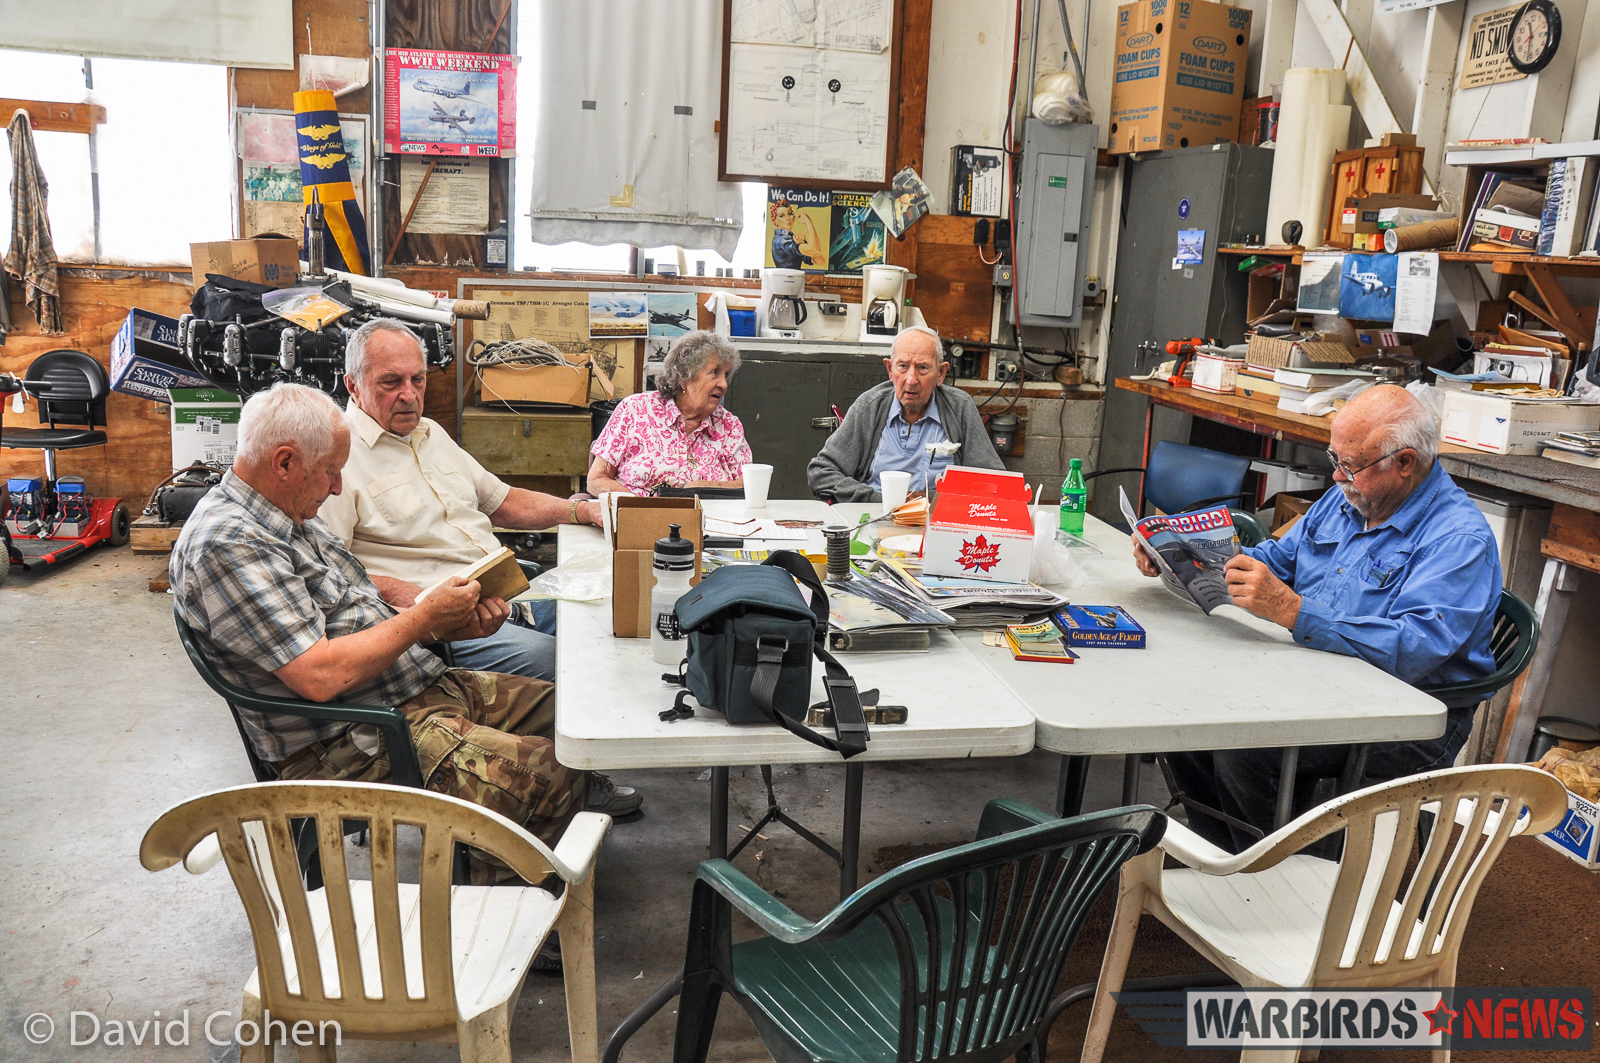 Some of the team at rest. At the table, left to right - Barry Stump, Dick Santora, Ruby Kosko, Jack Kosko and Gene Ambrose (notice Gene is reading Warbird Digest). (Photo by David Cohen)